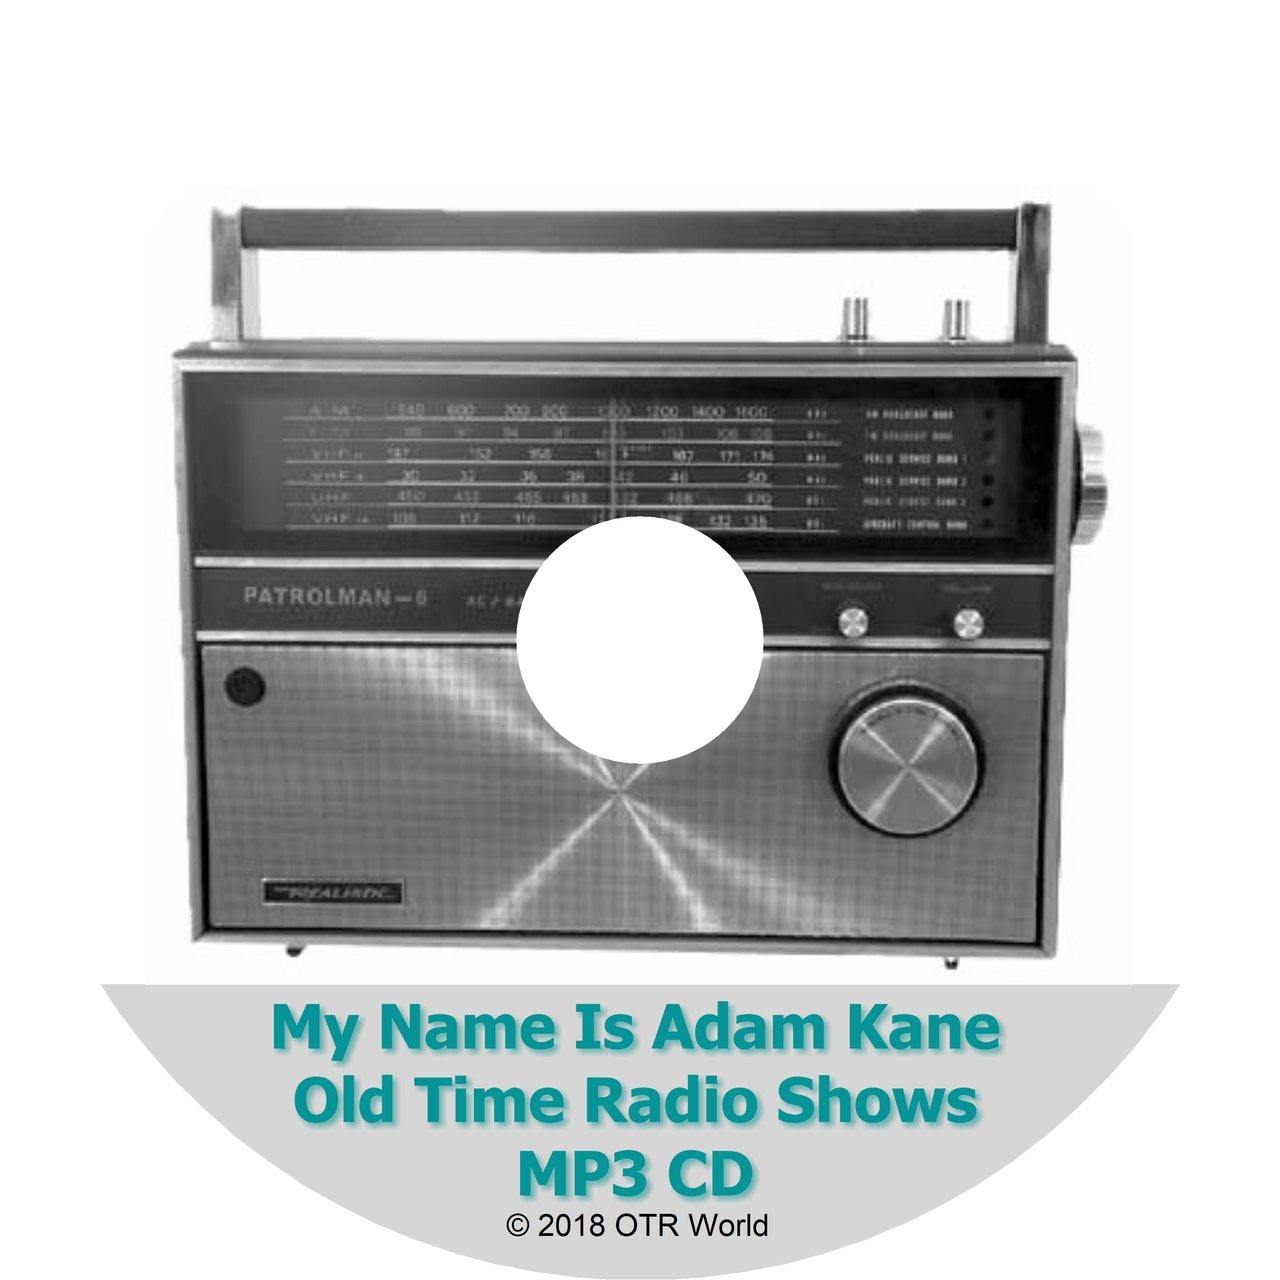 My Name Is Adam Kane Old Time Radio Shows 41 Episodes On MP3 CD - OTR World